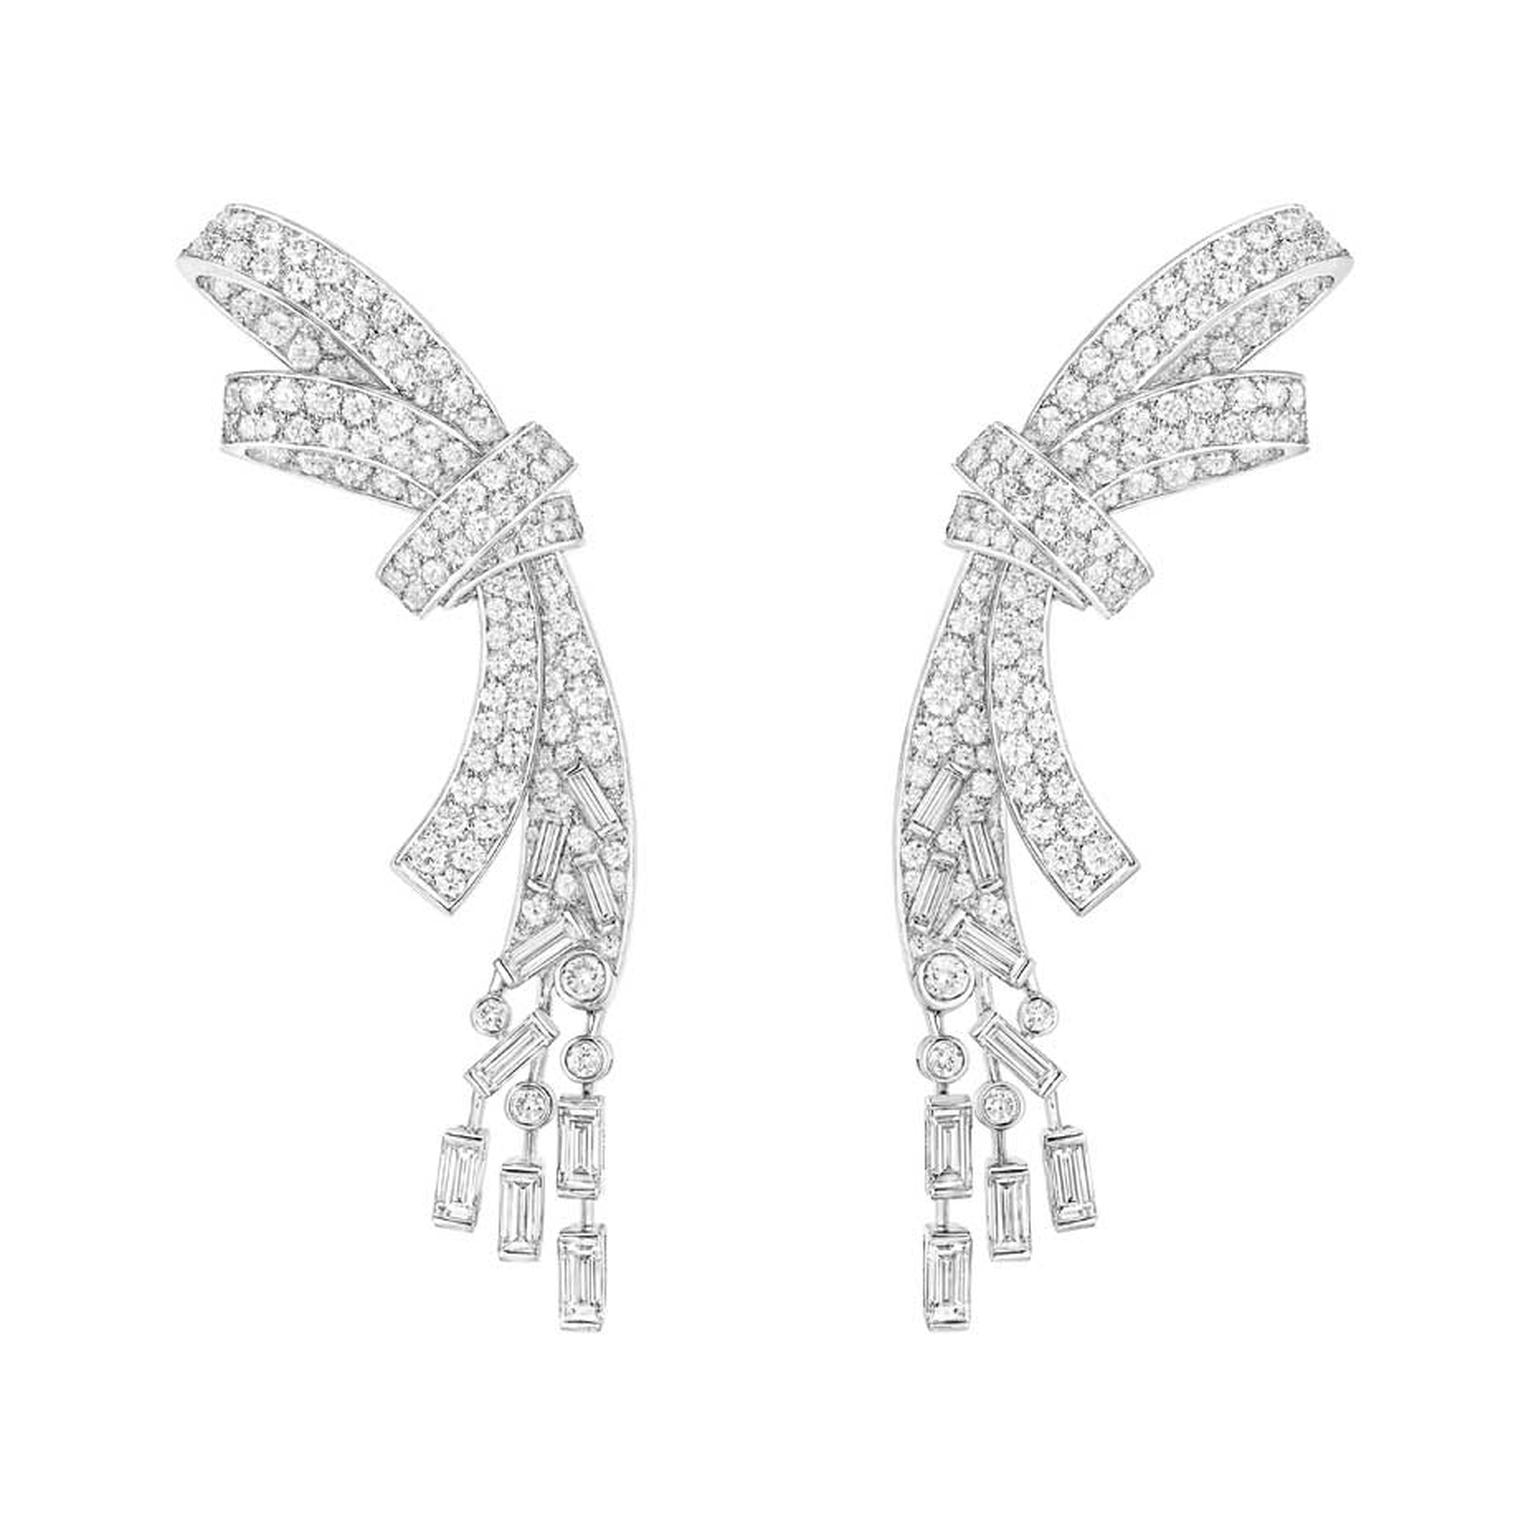 White gold Chanel Ruban earrings set with 18 baguette-cut diamonds and 320 brilliant-cut diamonds, from the new new Les Intemporels de Chanel high jewellery collection.